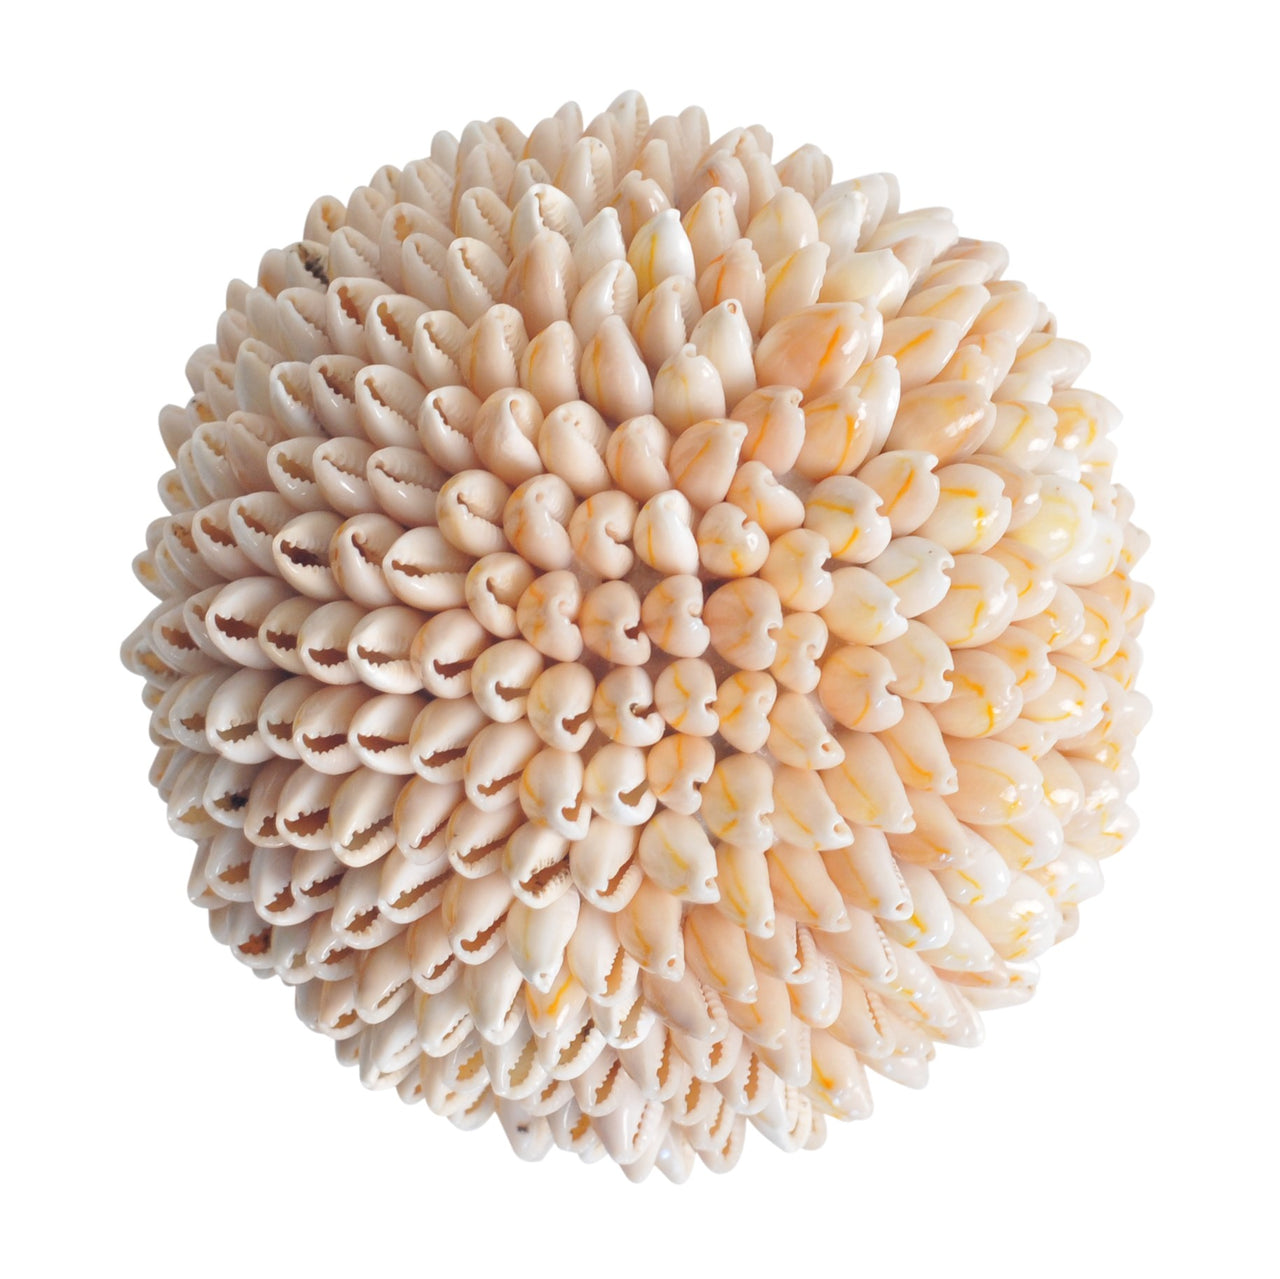 Shell Cowrie Ball- Natural